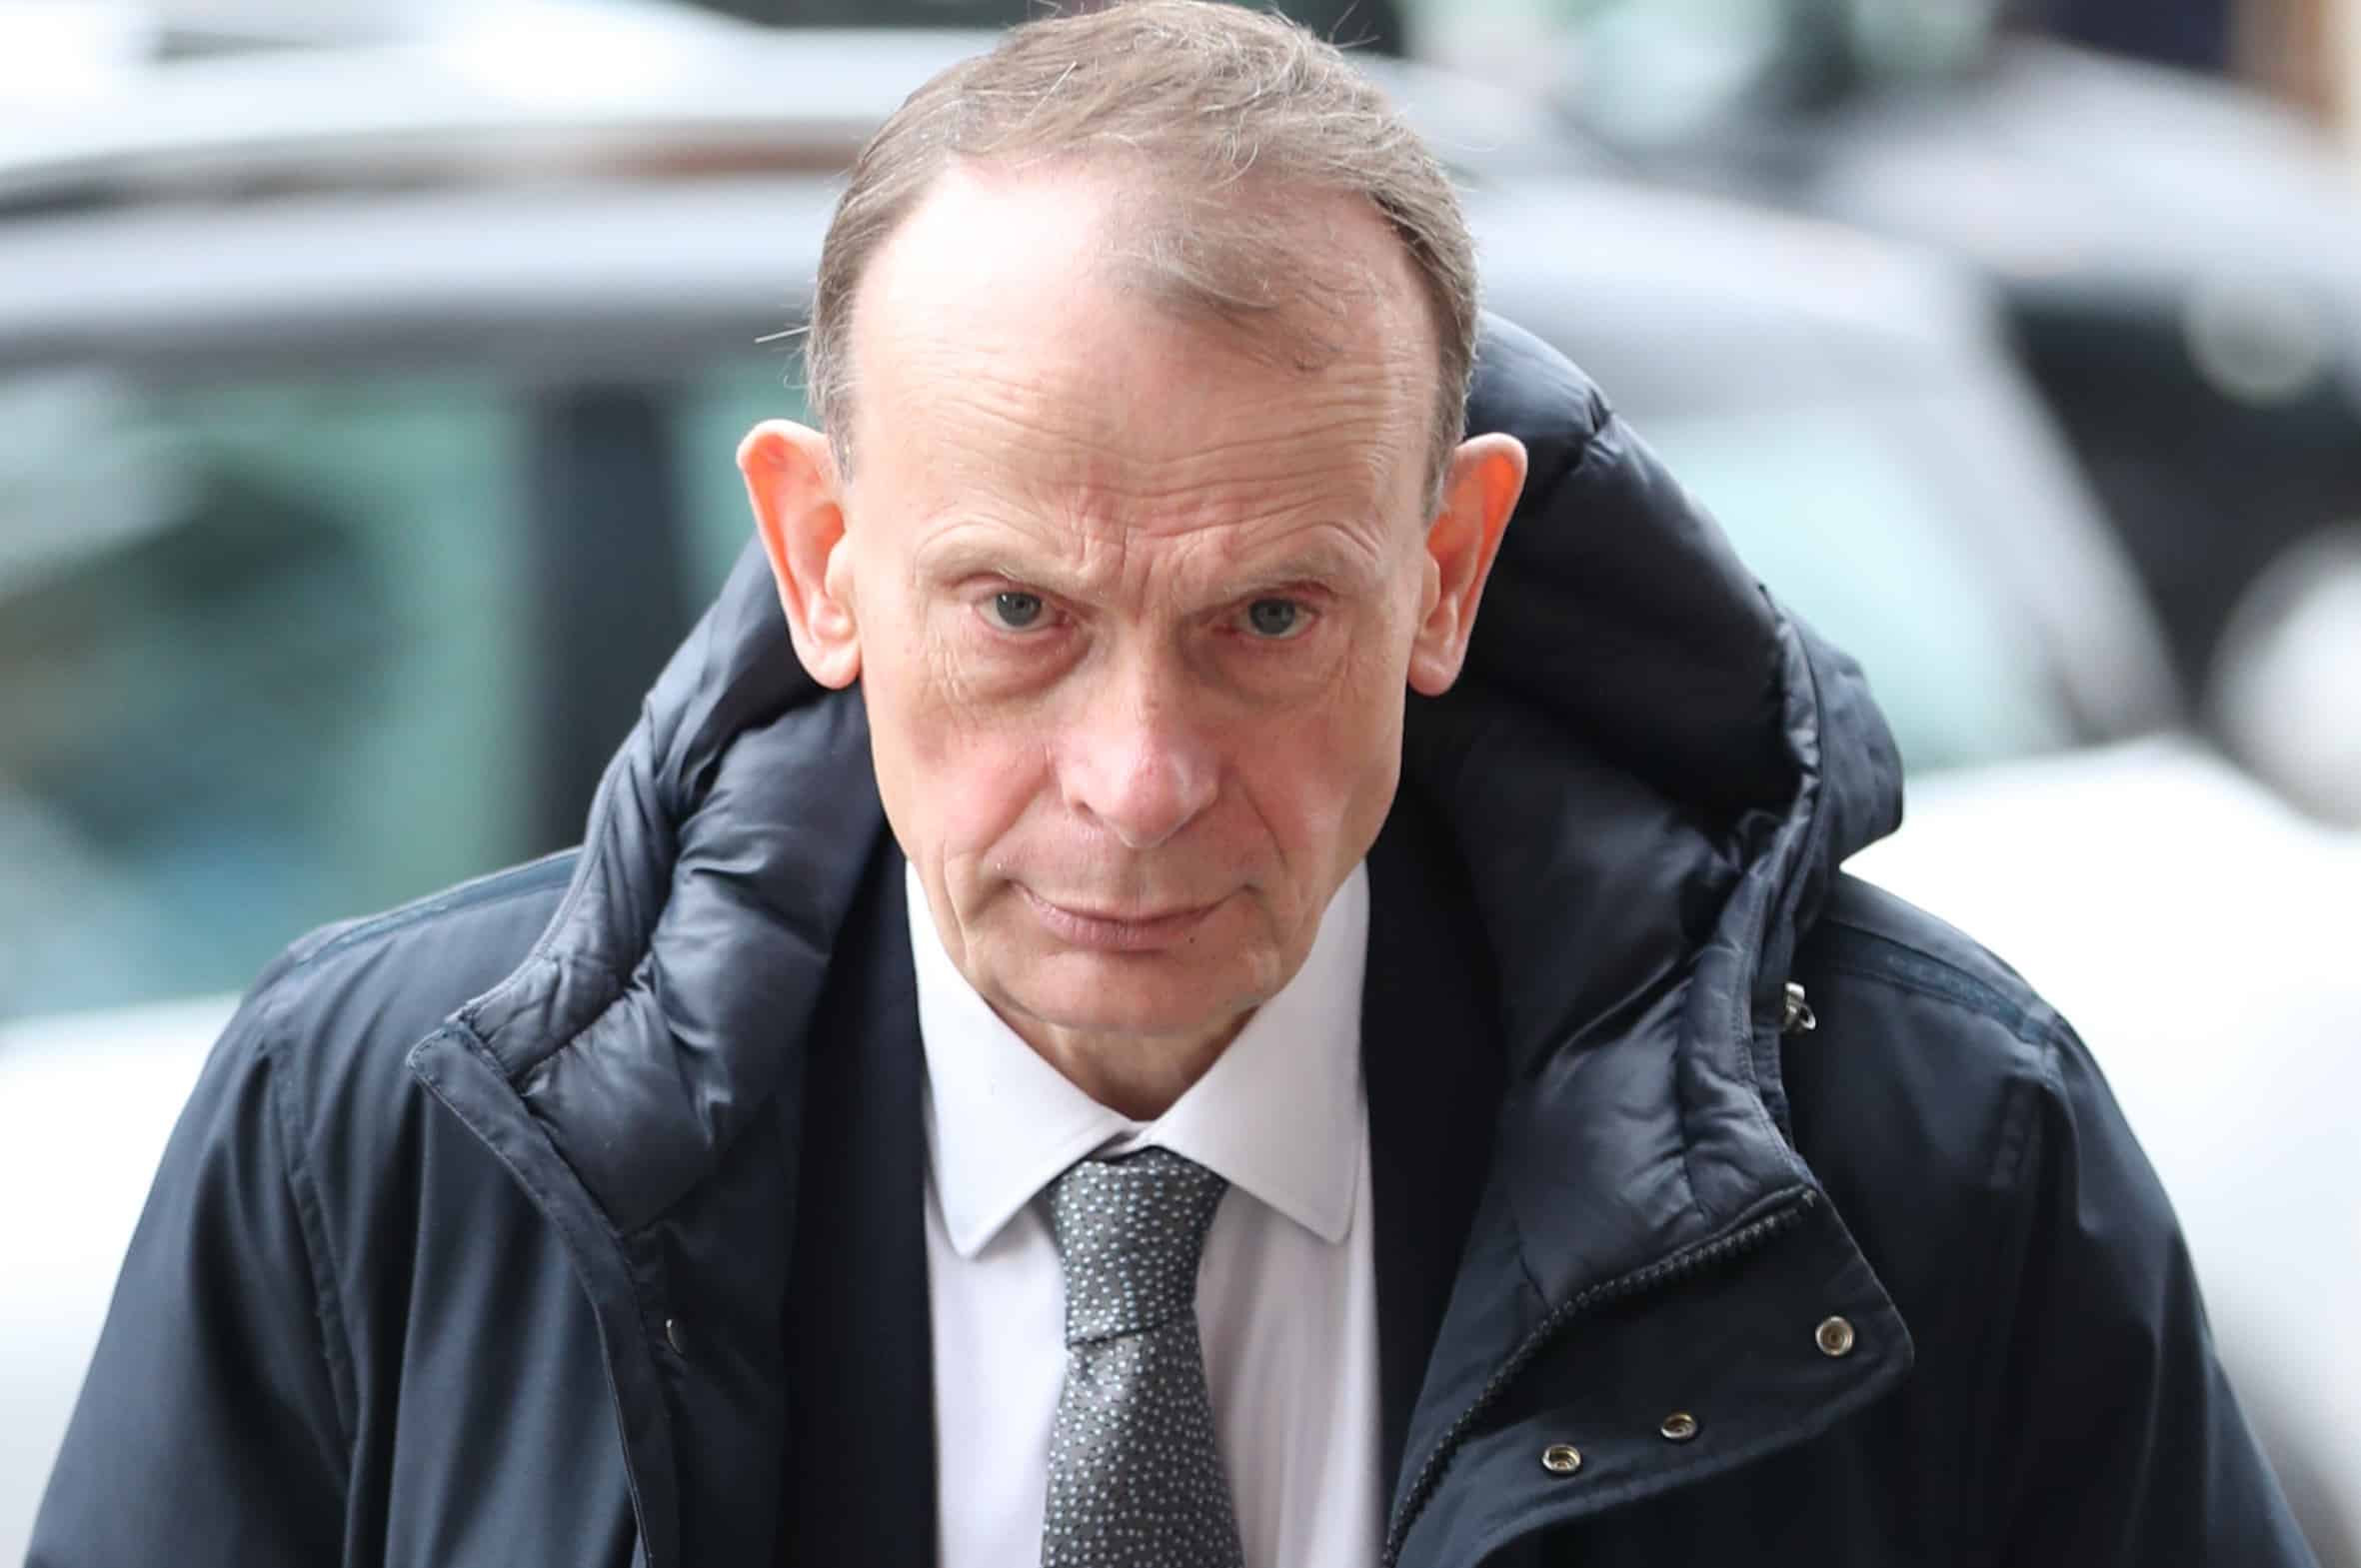 Andrew Marr joins the New Statesman after quitting BBC